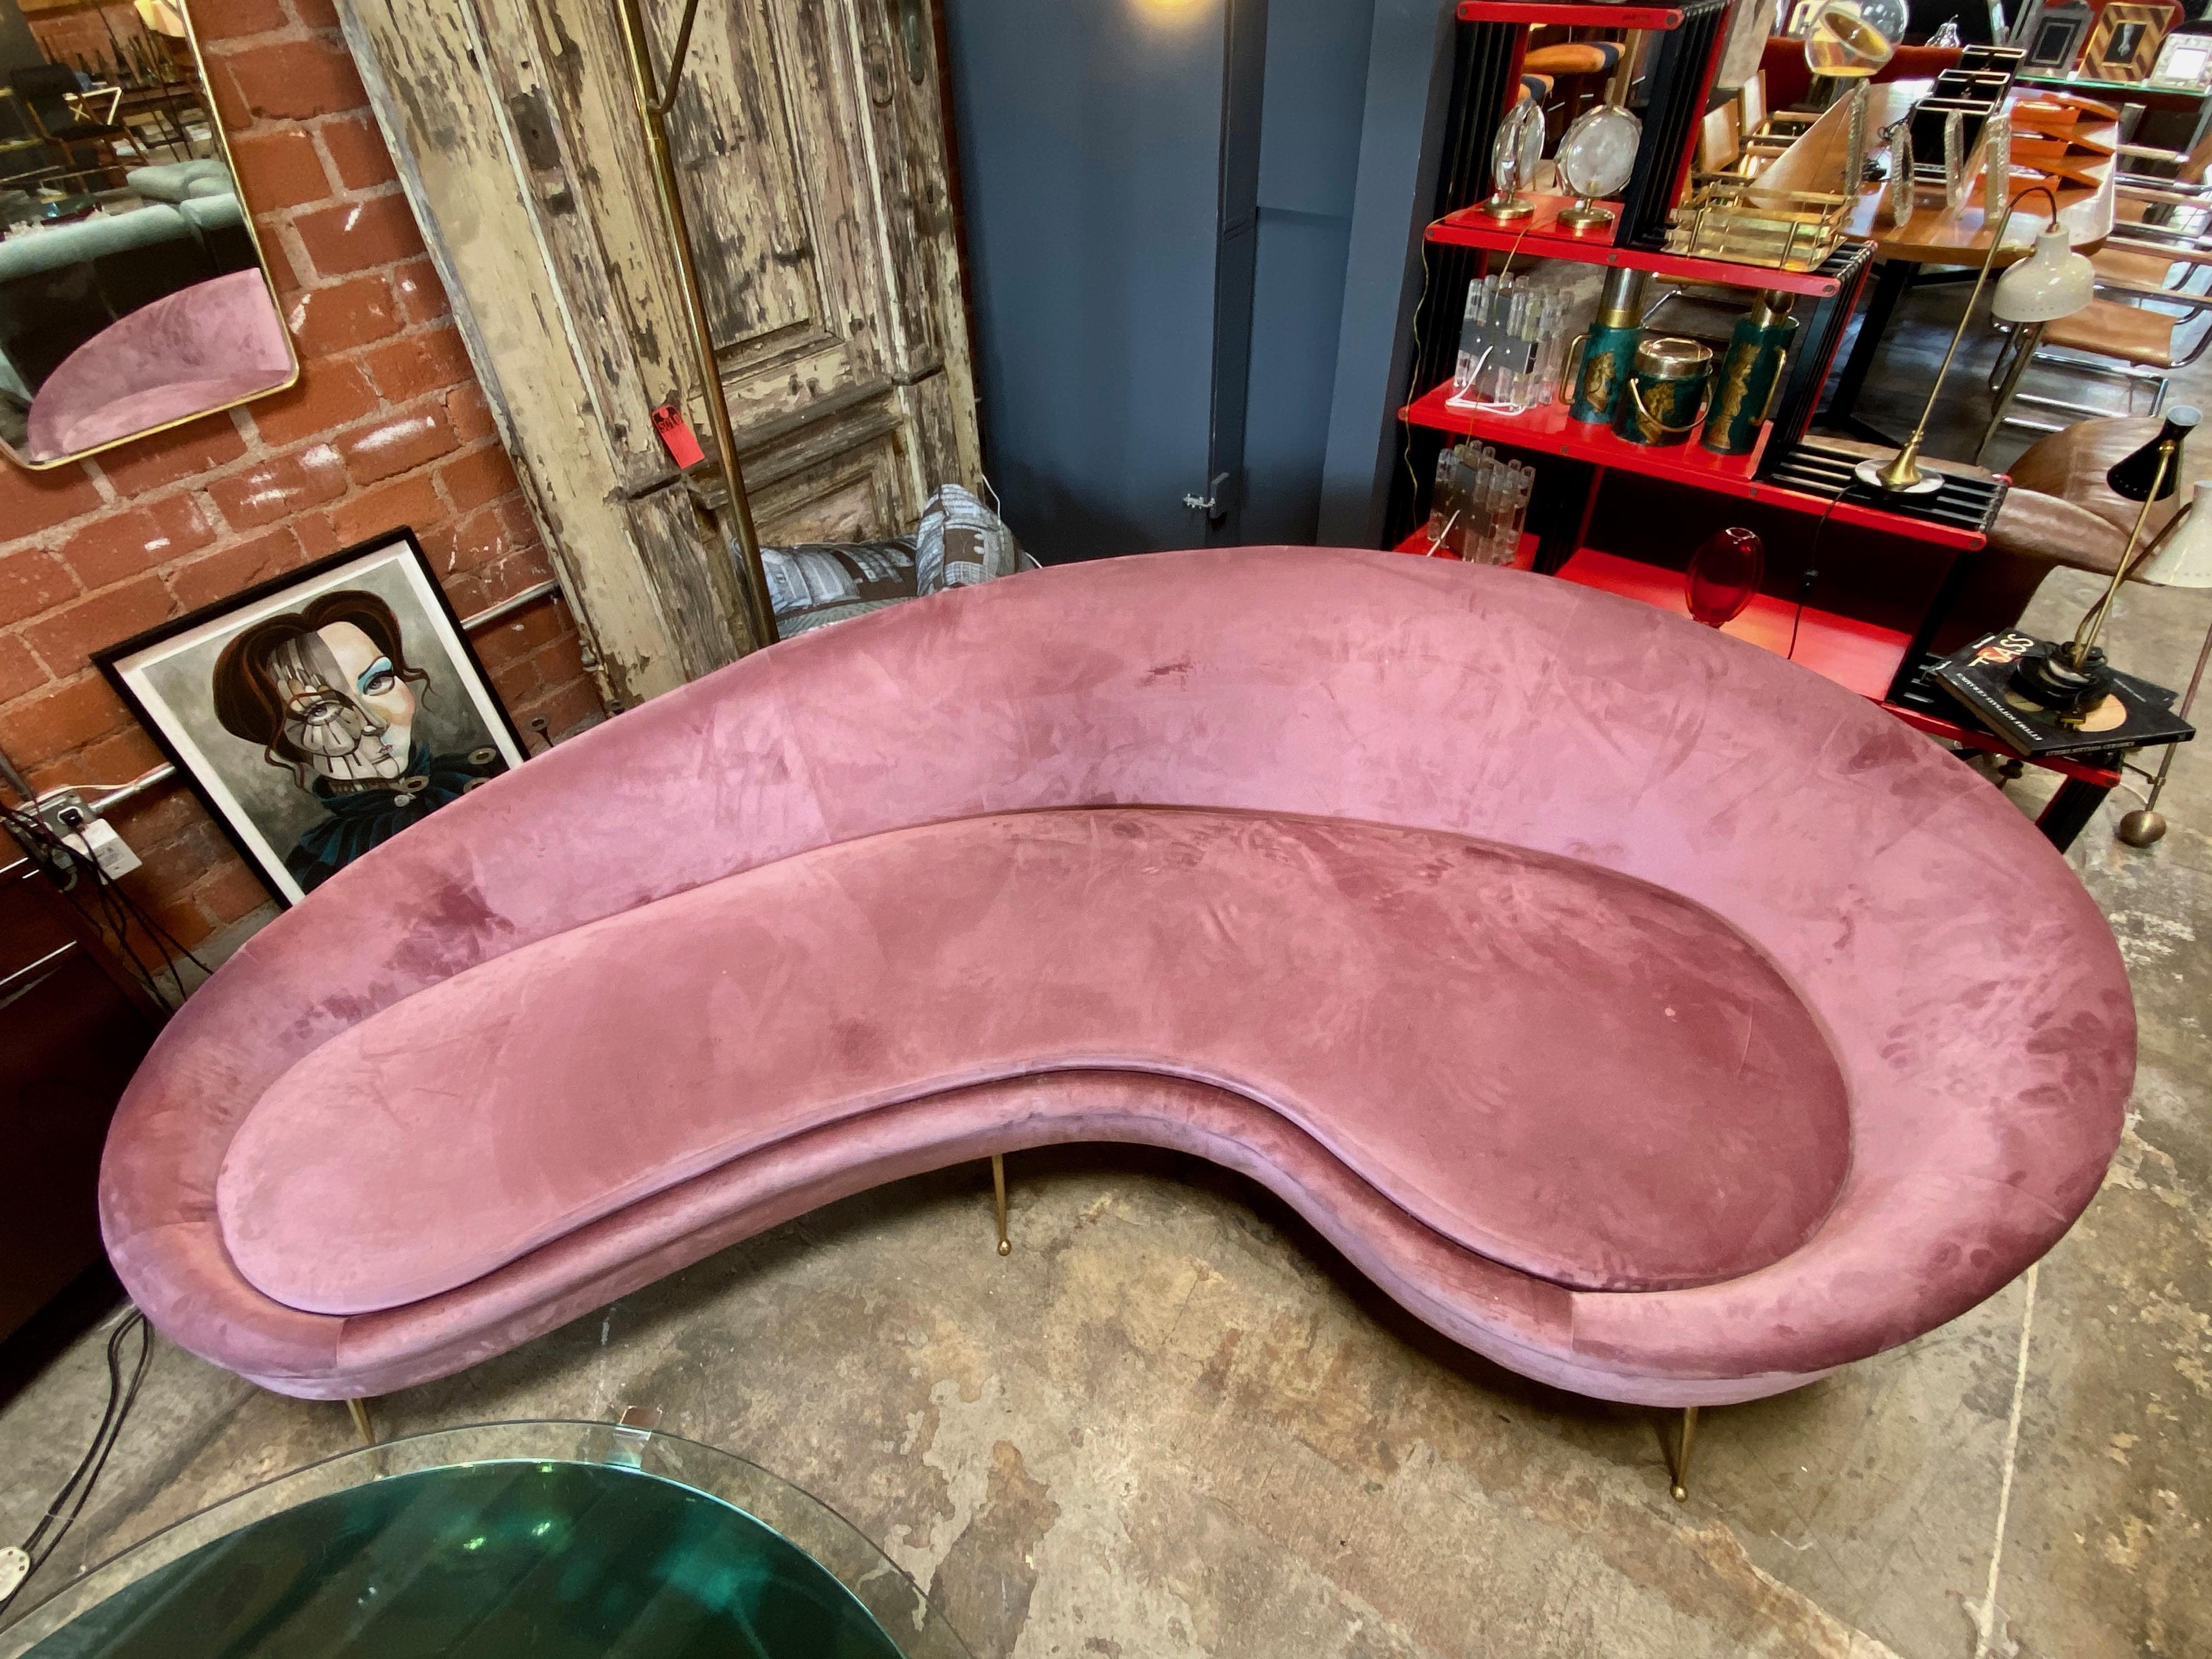 Italian pale pink blush velvet upholstered sofa with brass legs in the style of Federico Munari. The curving form allows it to be placed in many room configurations as it looks good from the back as well as the front.